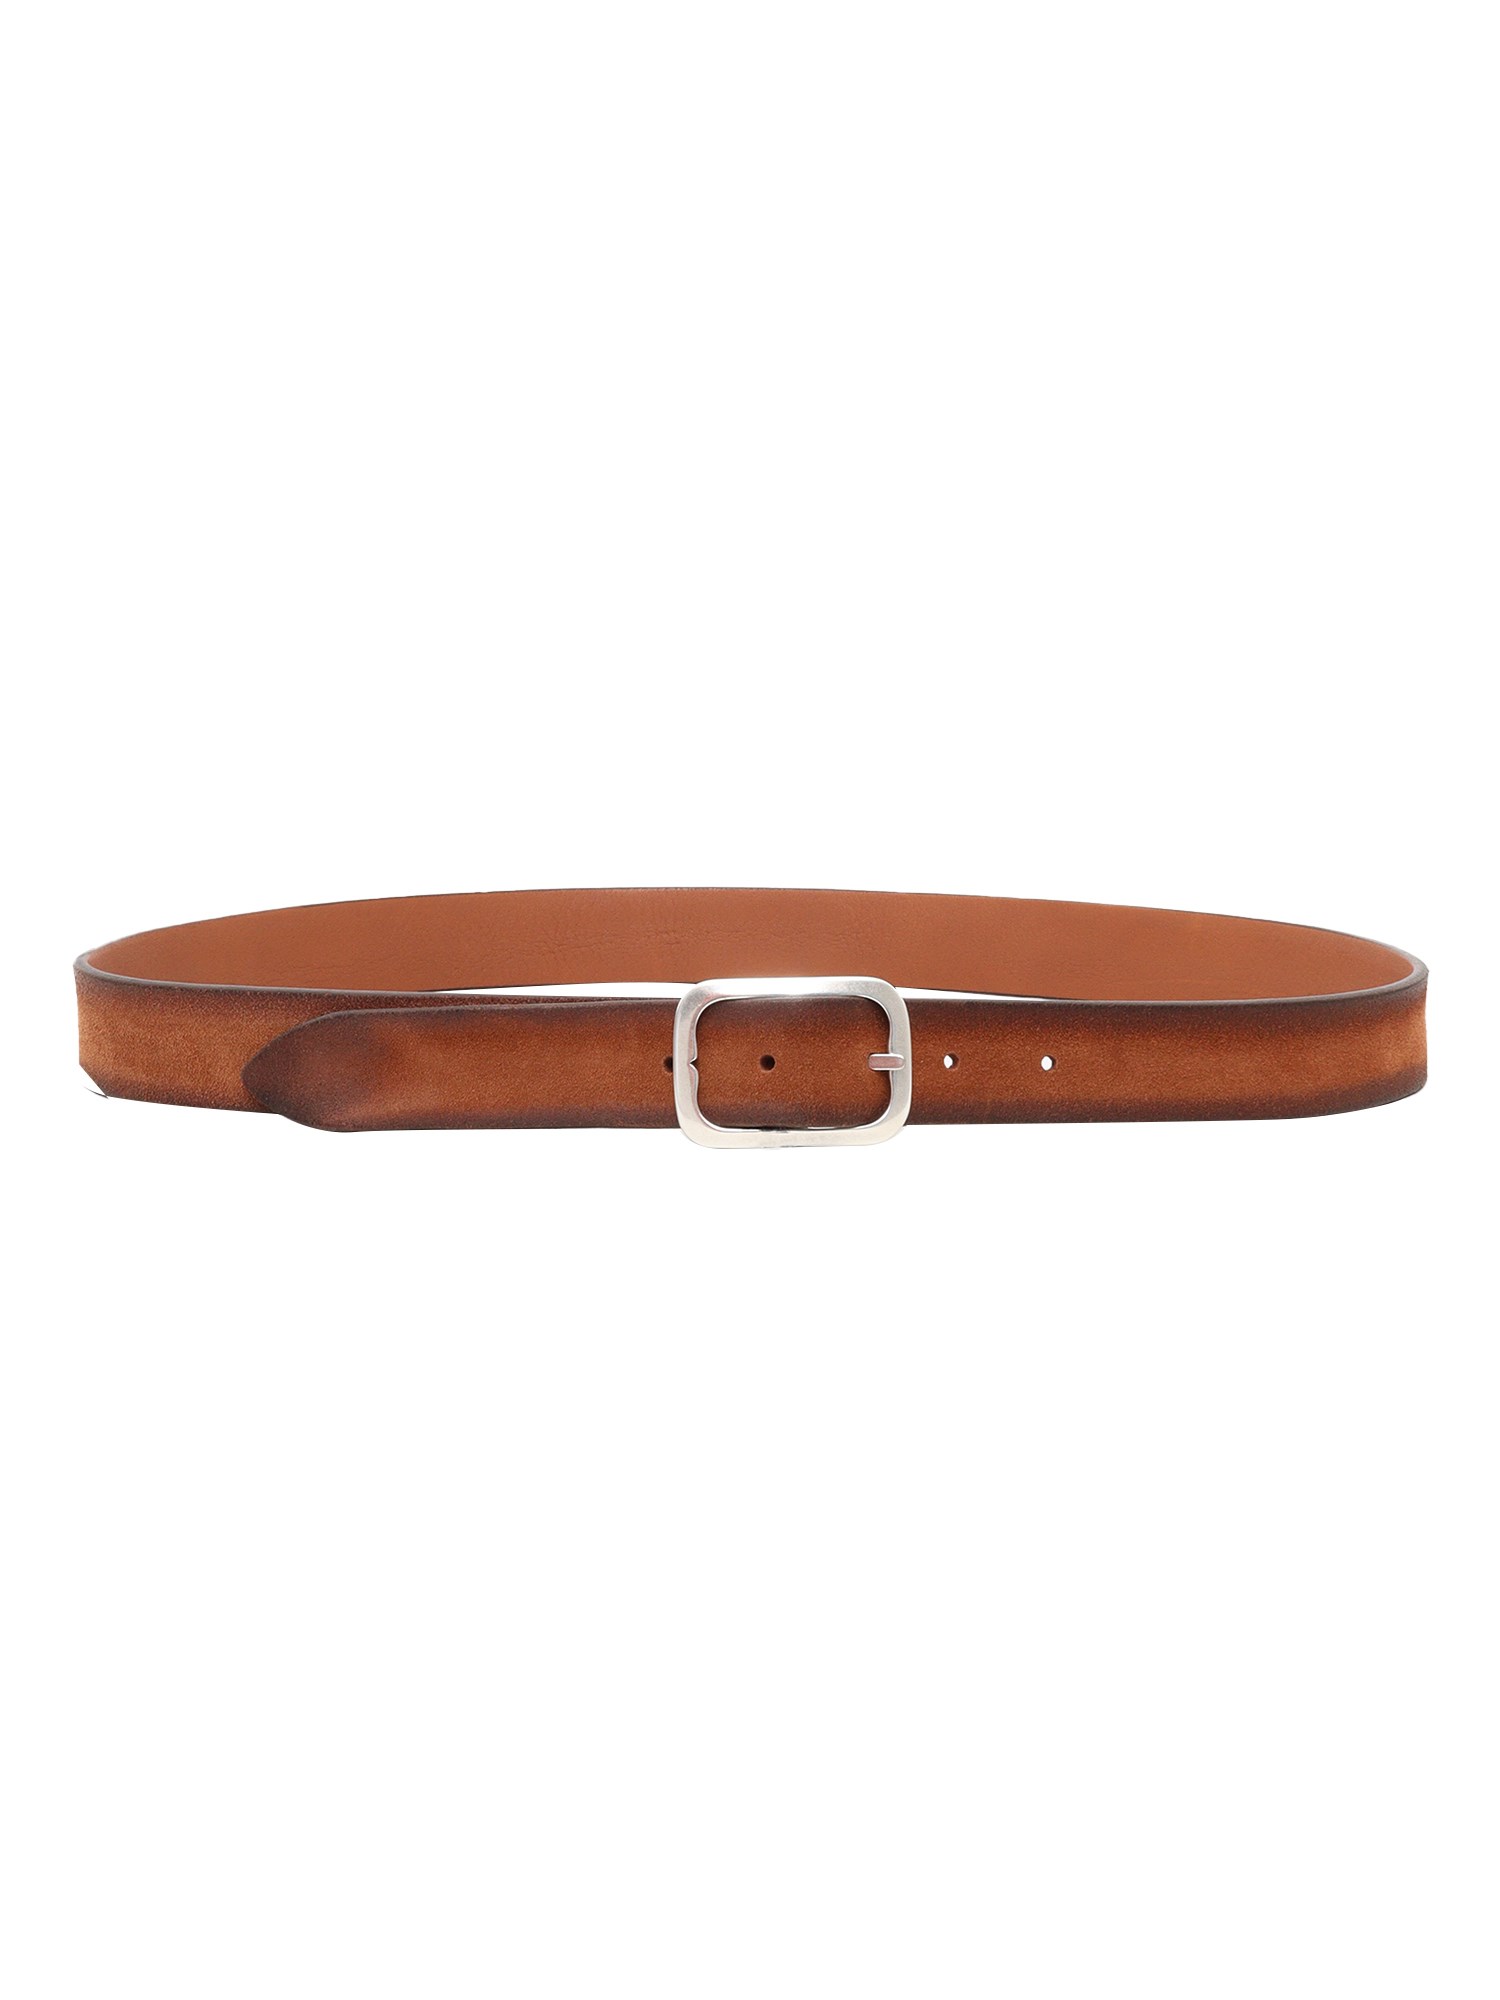 Orciani Brown Leather Belt